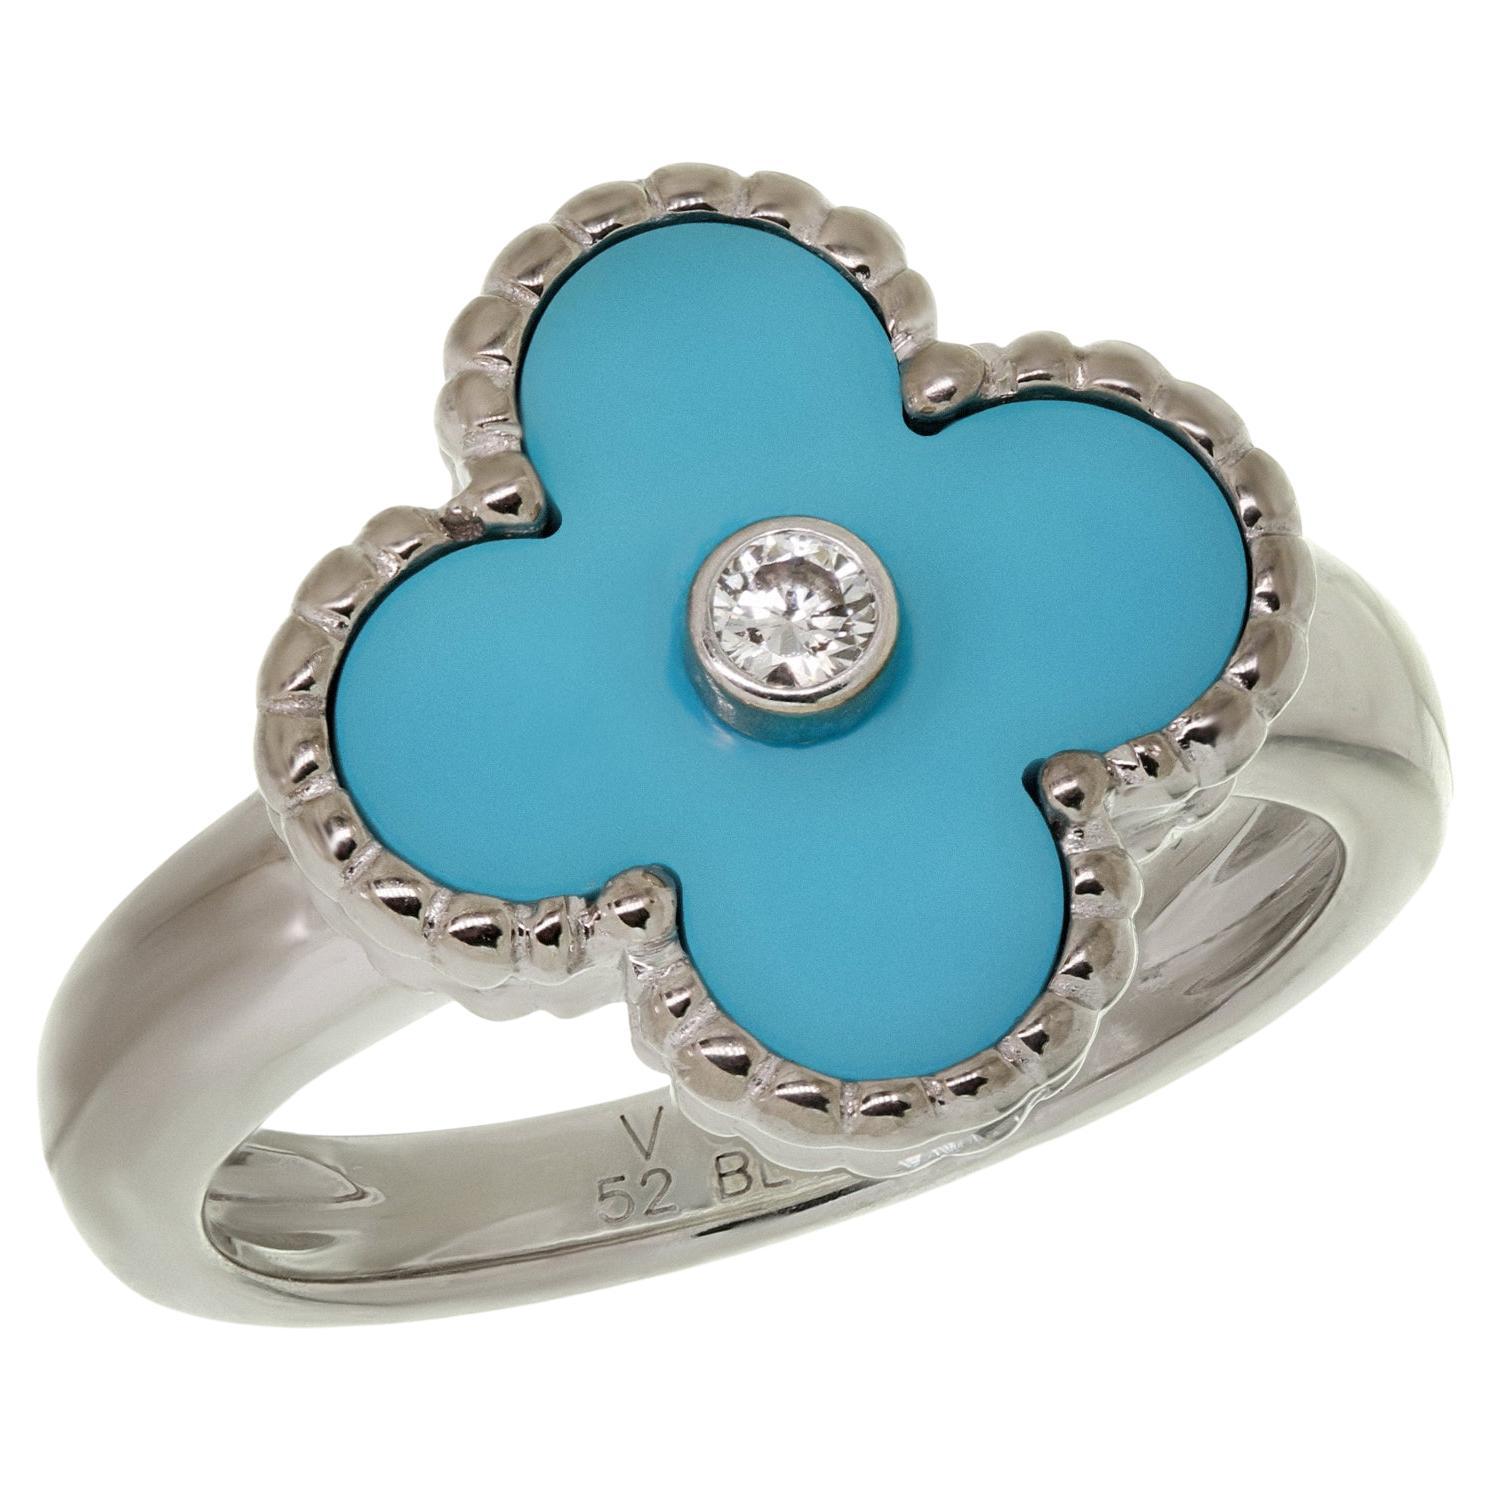 VAN CLEEF & ARPELS Alhambra Diamond Turquoise White Gold Ring Size 52 For Sale